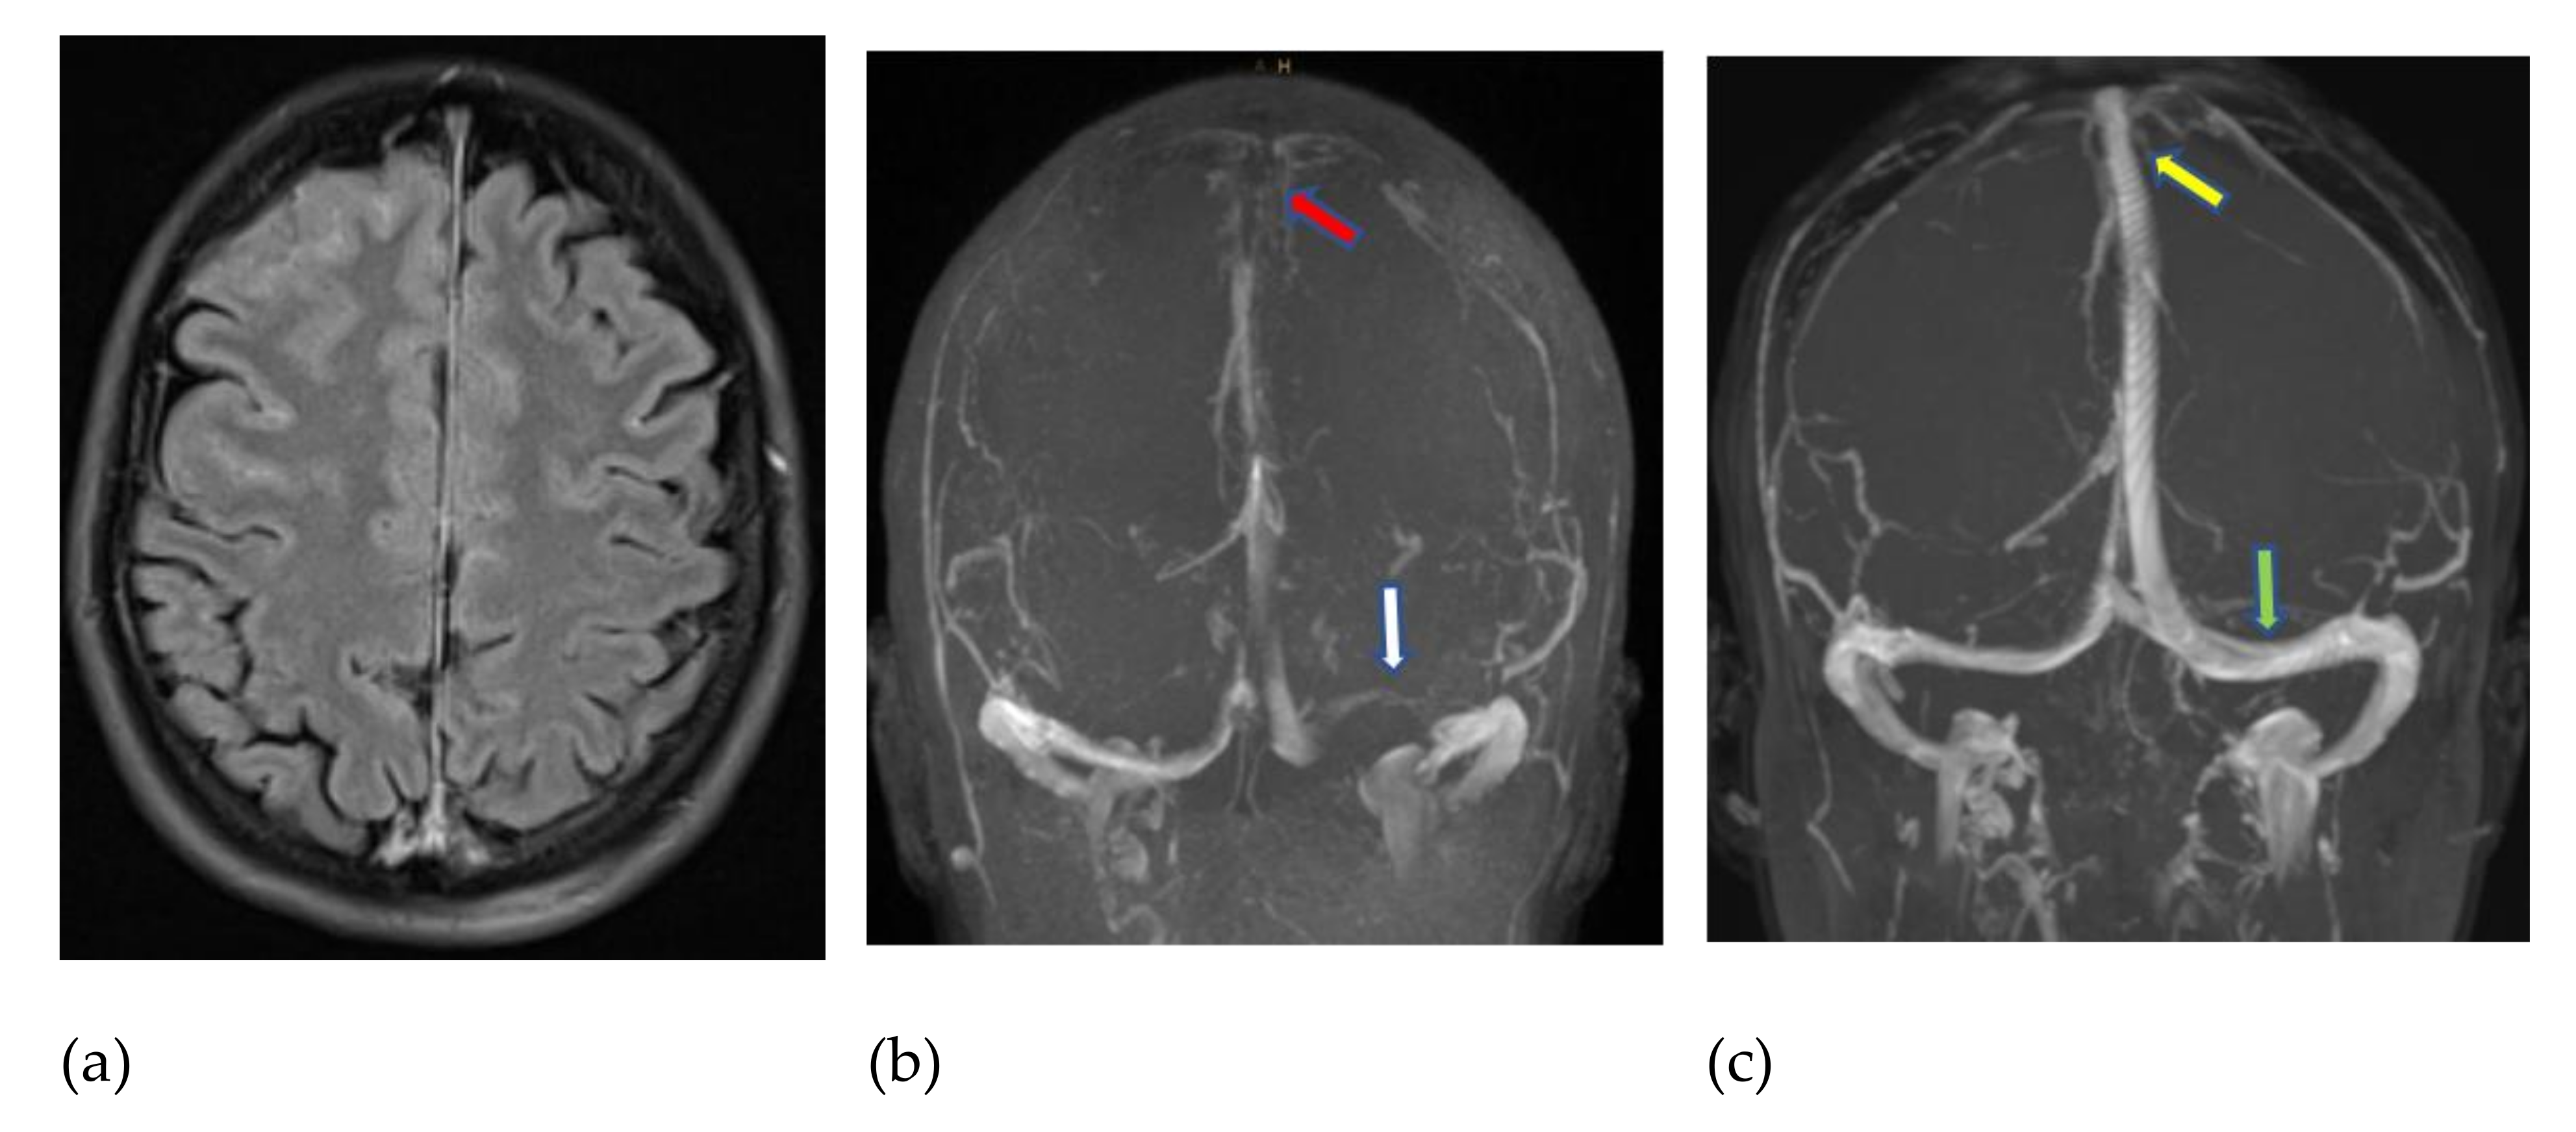 JCM | Free Full-Text | Thrombocytopenia and Intracranial Venous Sinus  Thrombosis after “COVID-19 Vaccine AstraZeneca” Exposure